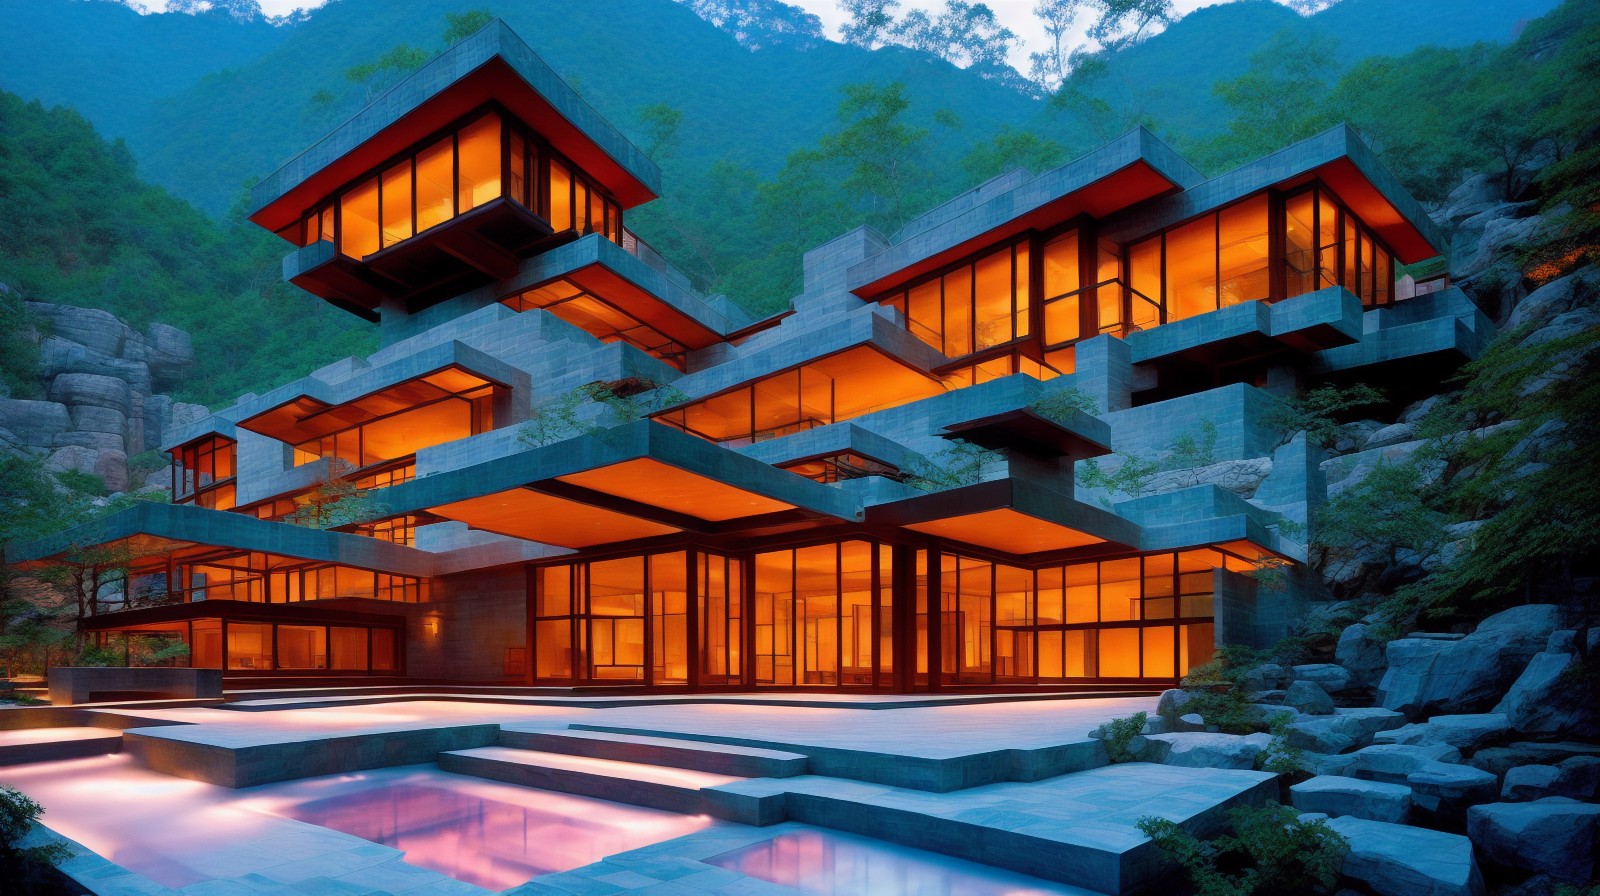 8 images of Fallingwater on the Hill, modeled on Wright's style by Stable Diffusion